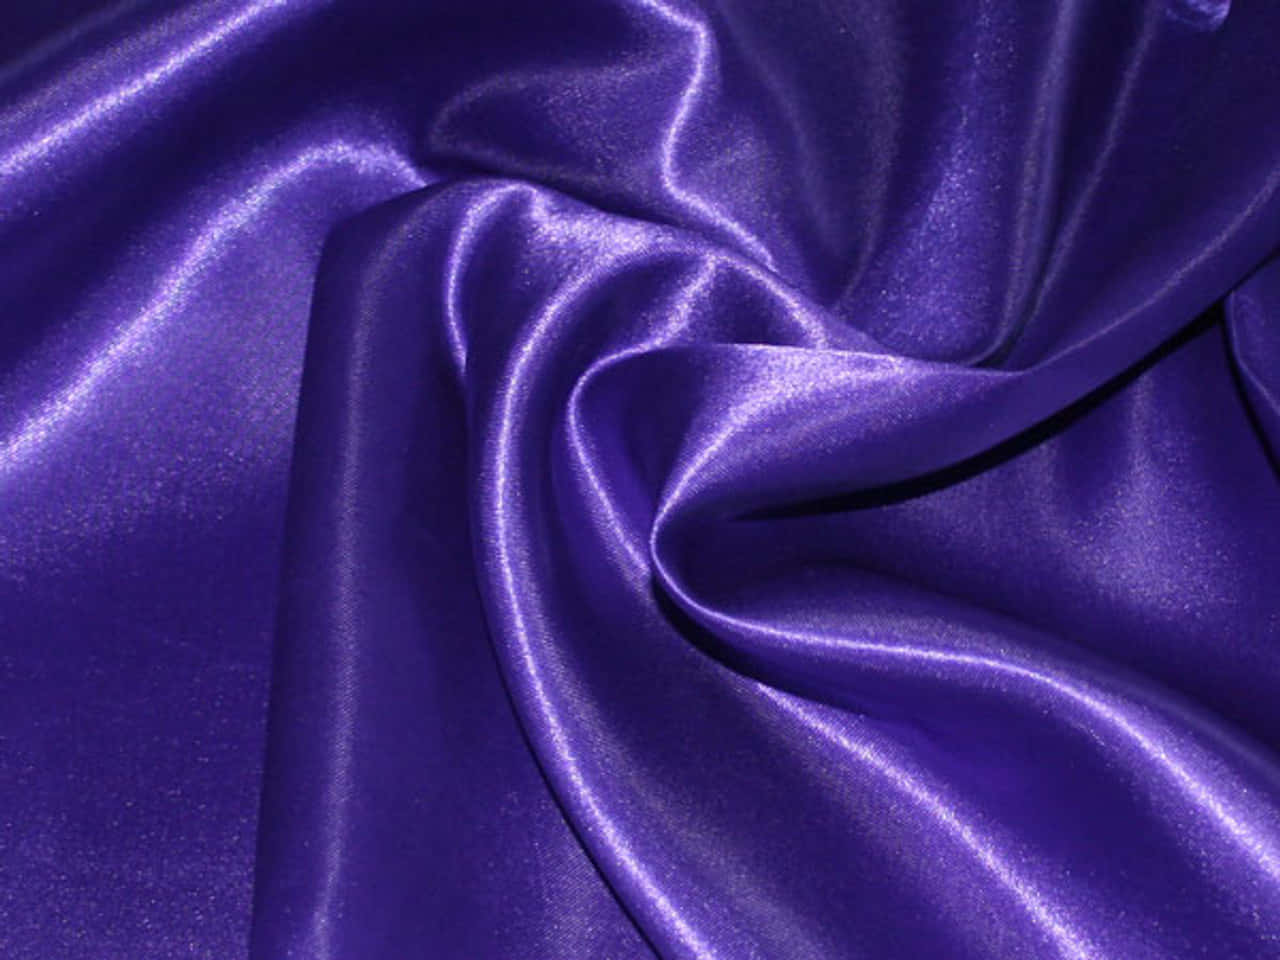 Check out this beautiful, deep purple fabric! Wallpaper